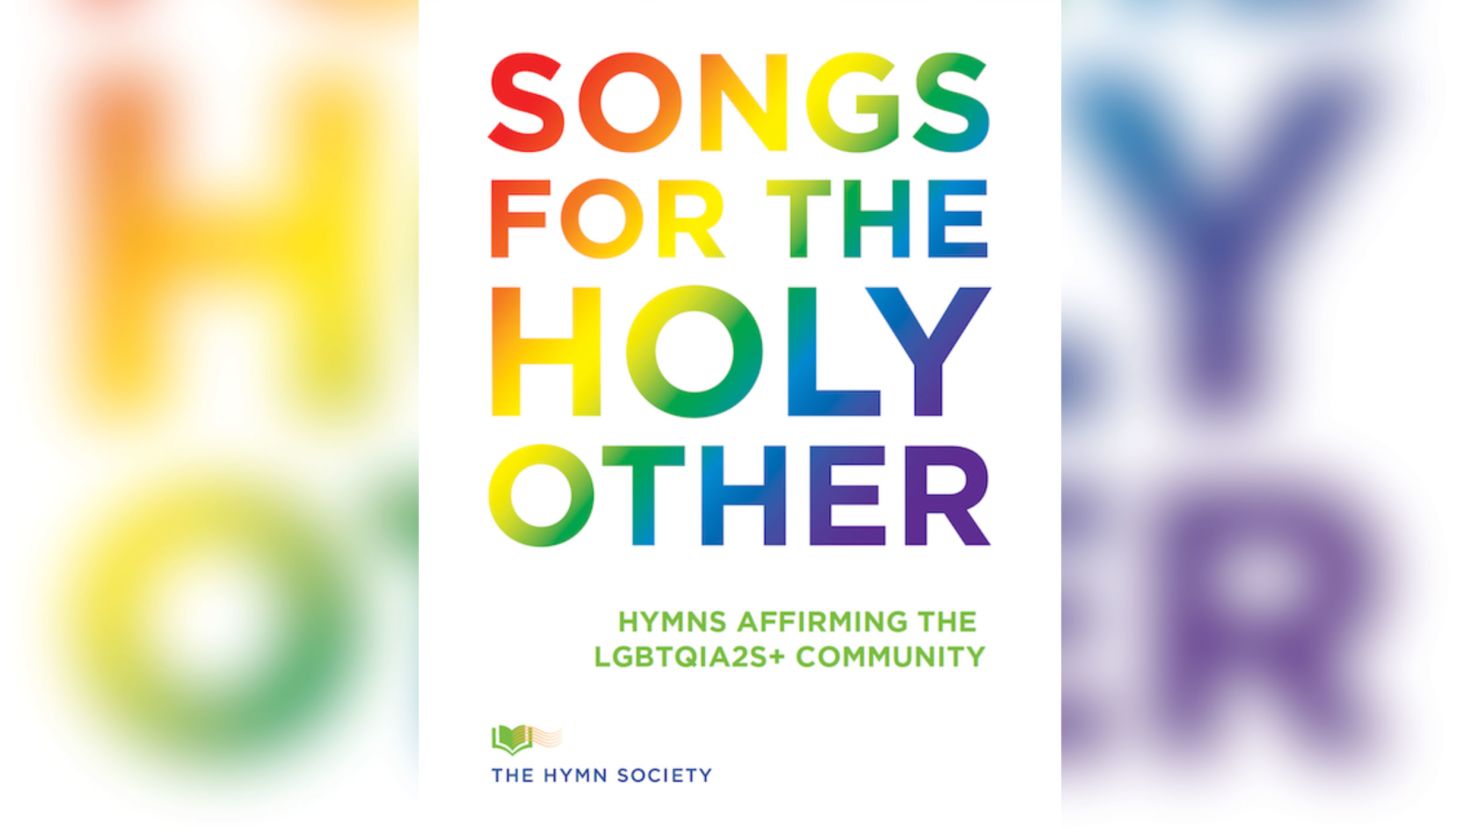 "Songs for the Holy Other" was compiled by the Hymn Society.